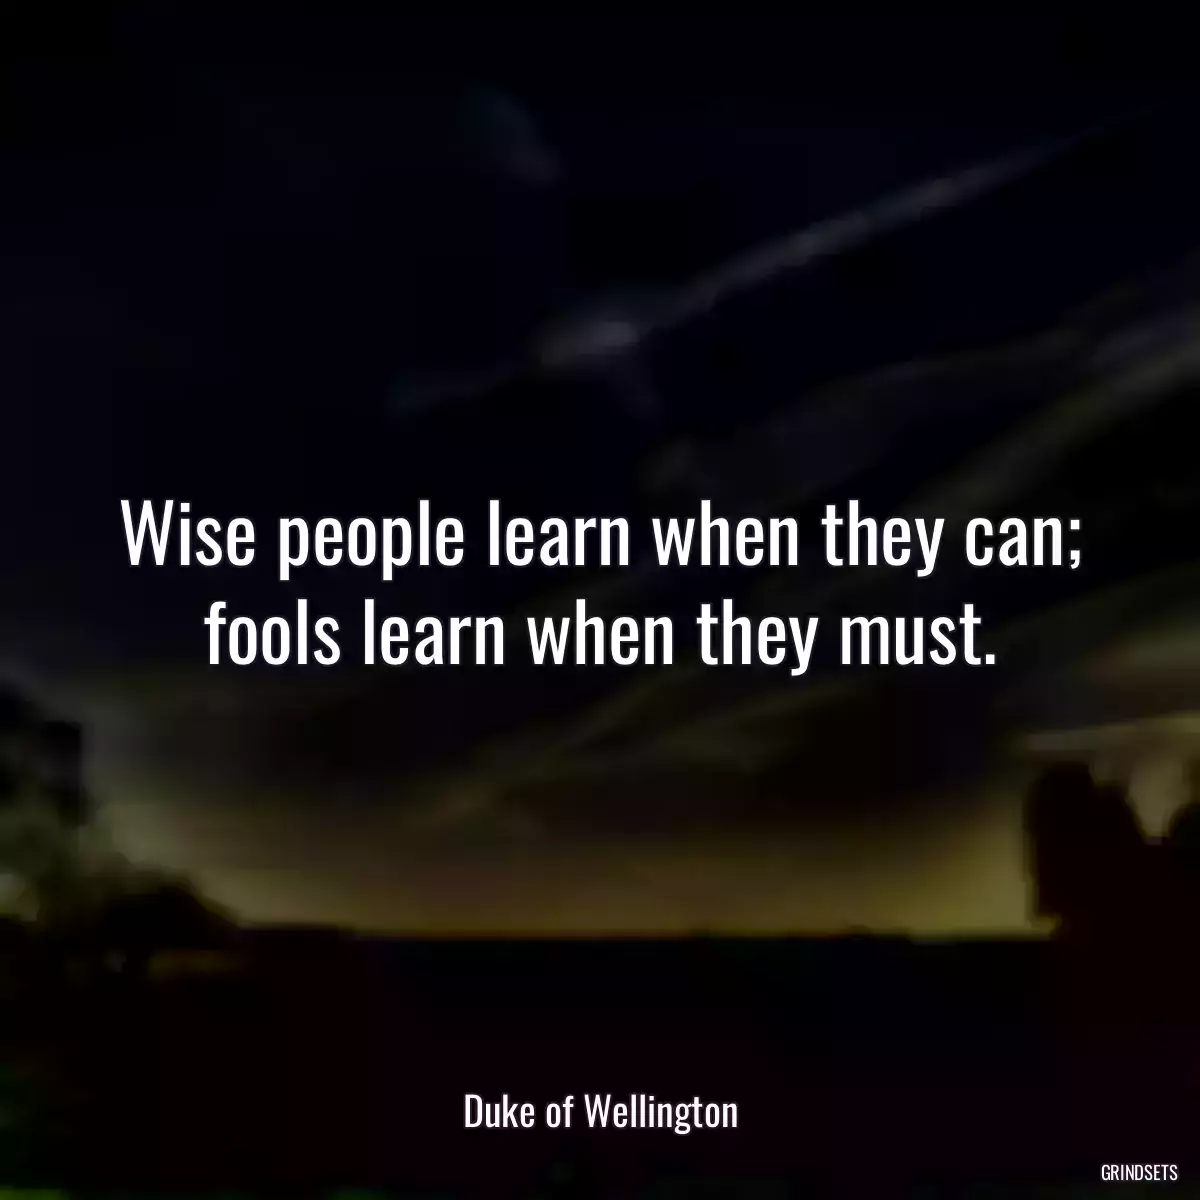 Wise people learn when they can; fools learn when they must.